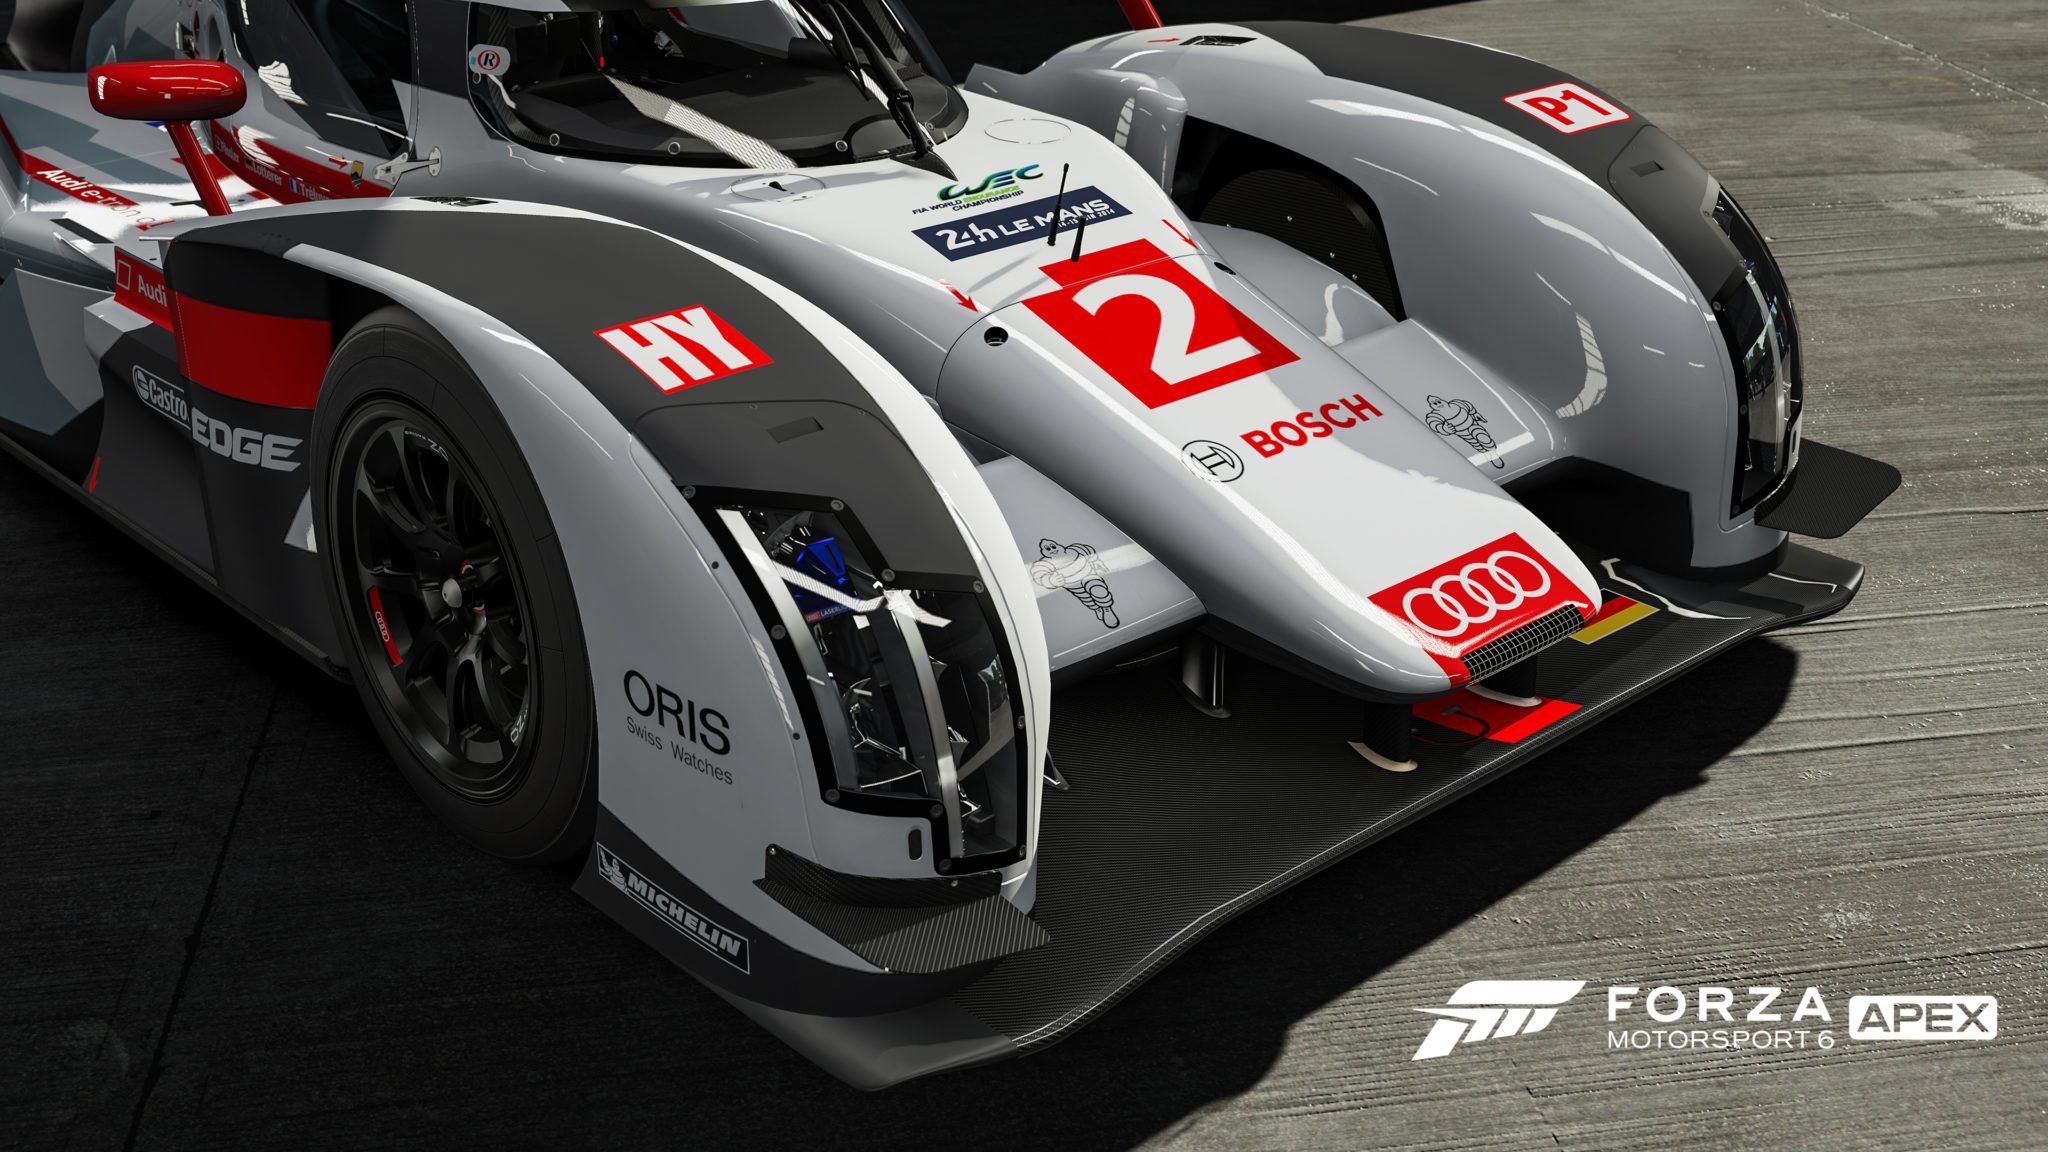 Forza Motorsport 6 Apex Brings Franchise To The PC, Digital Trends